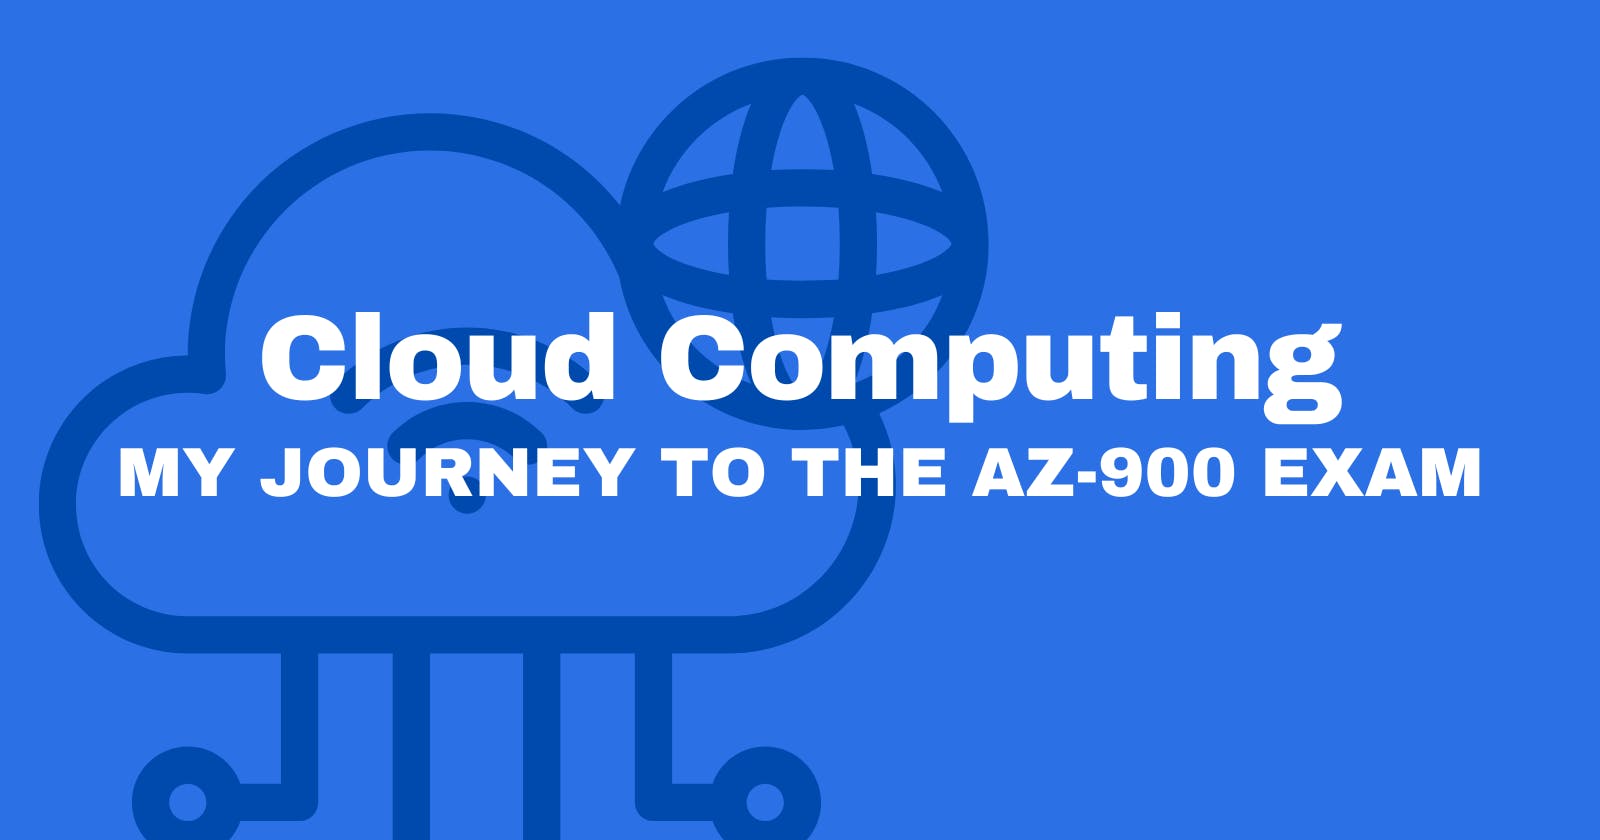 Learning Cloud Computing: My Journey to the AZ-900 Exam